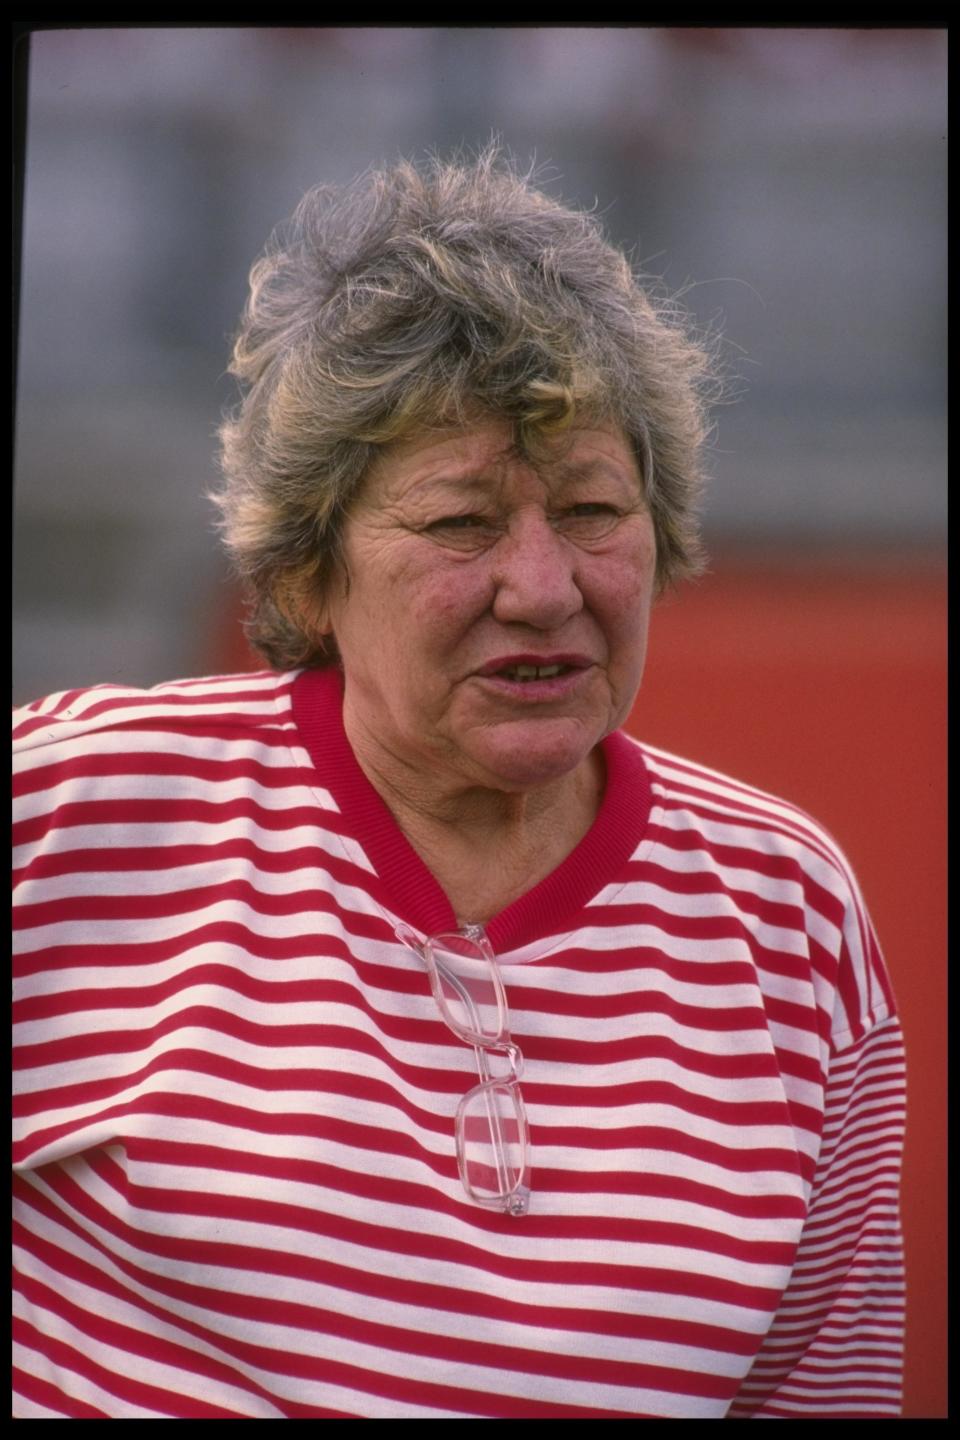 Marge Schott at Reds game.